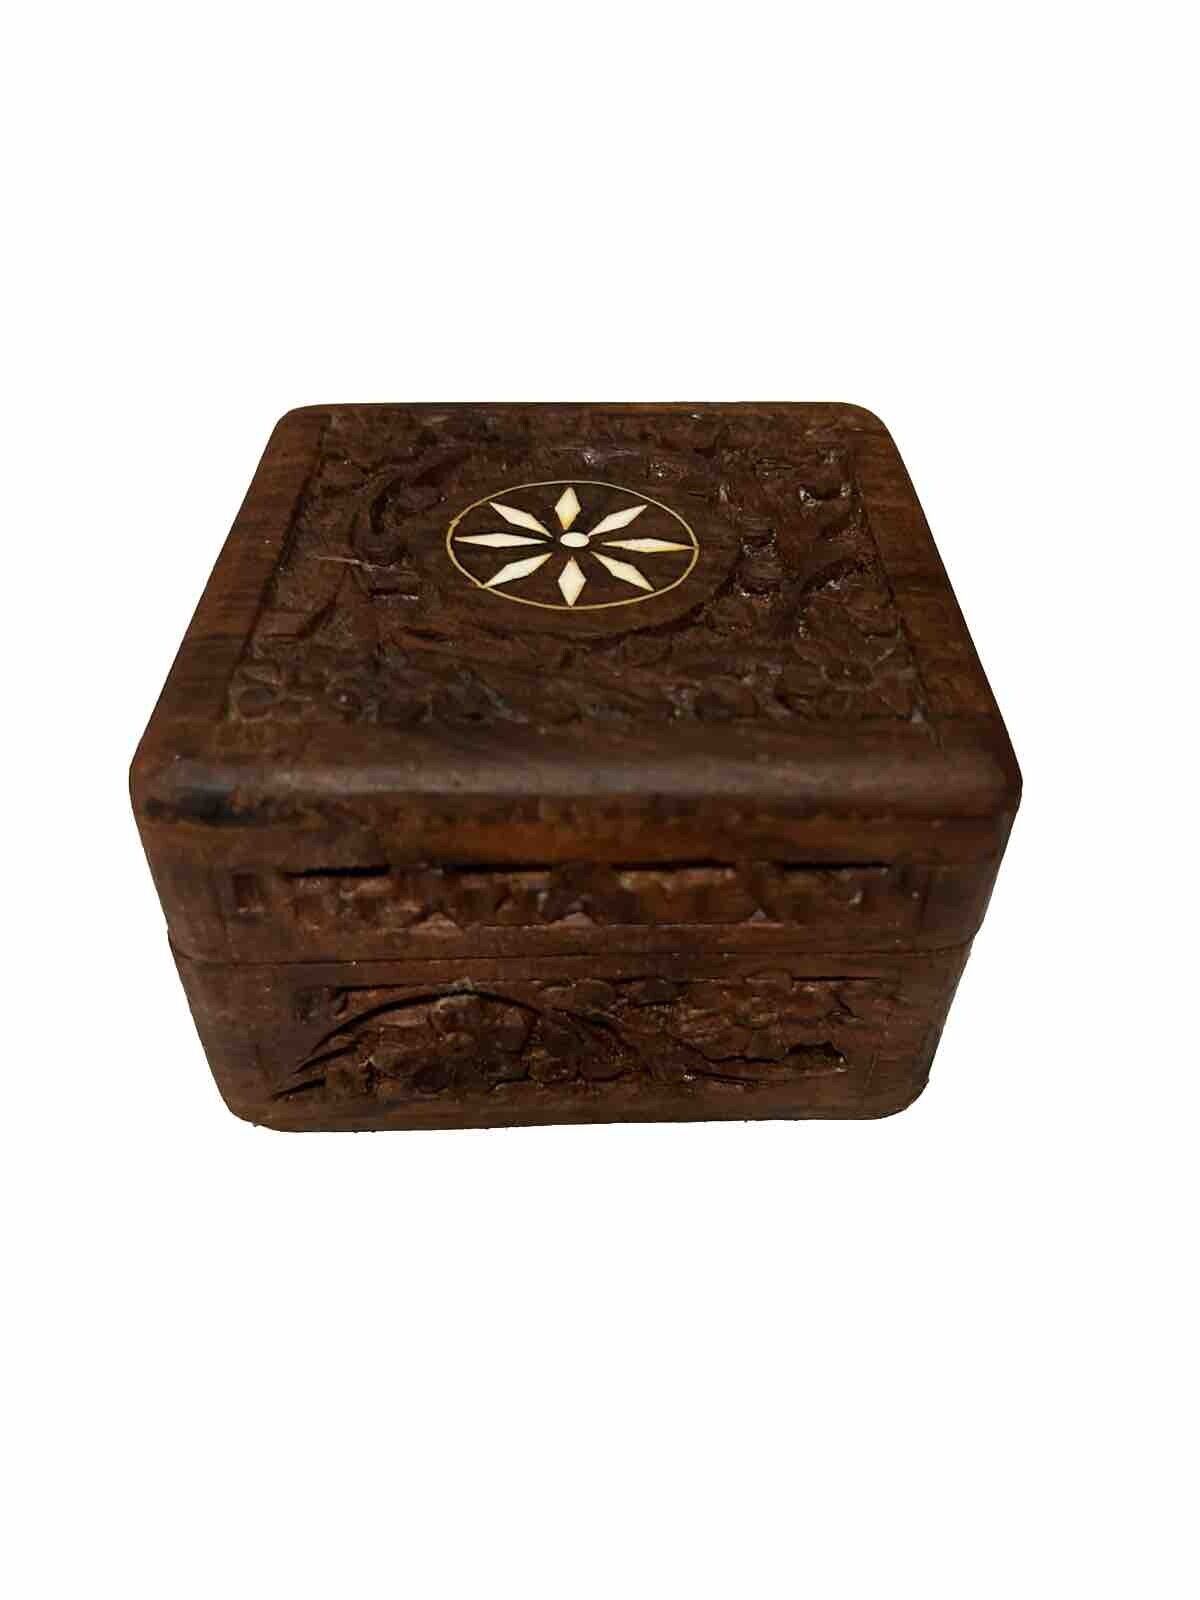 Hand Carved Wooden Inlaid Trinket Box From India. Vintage.